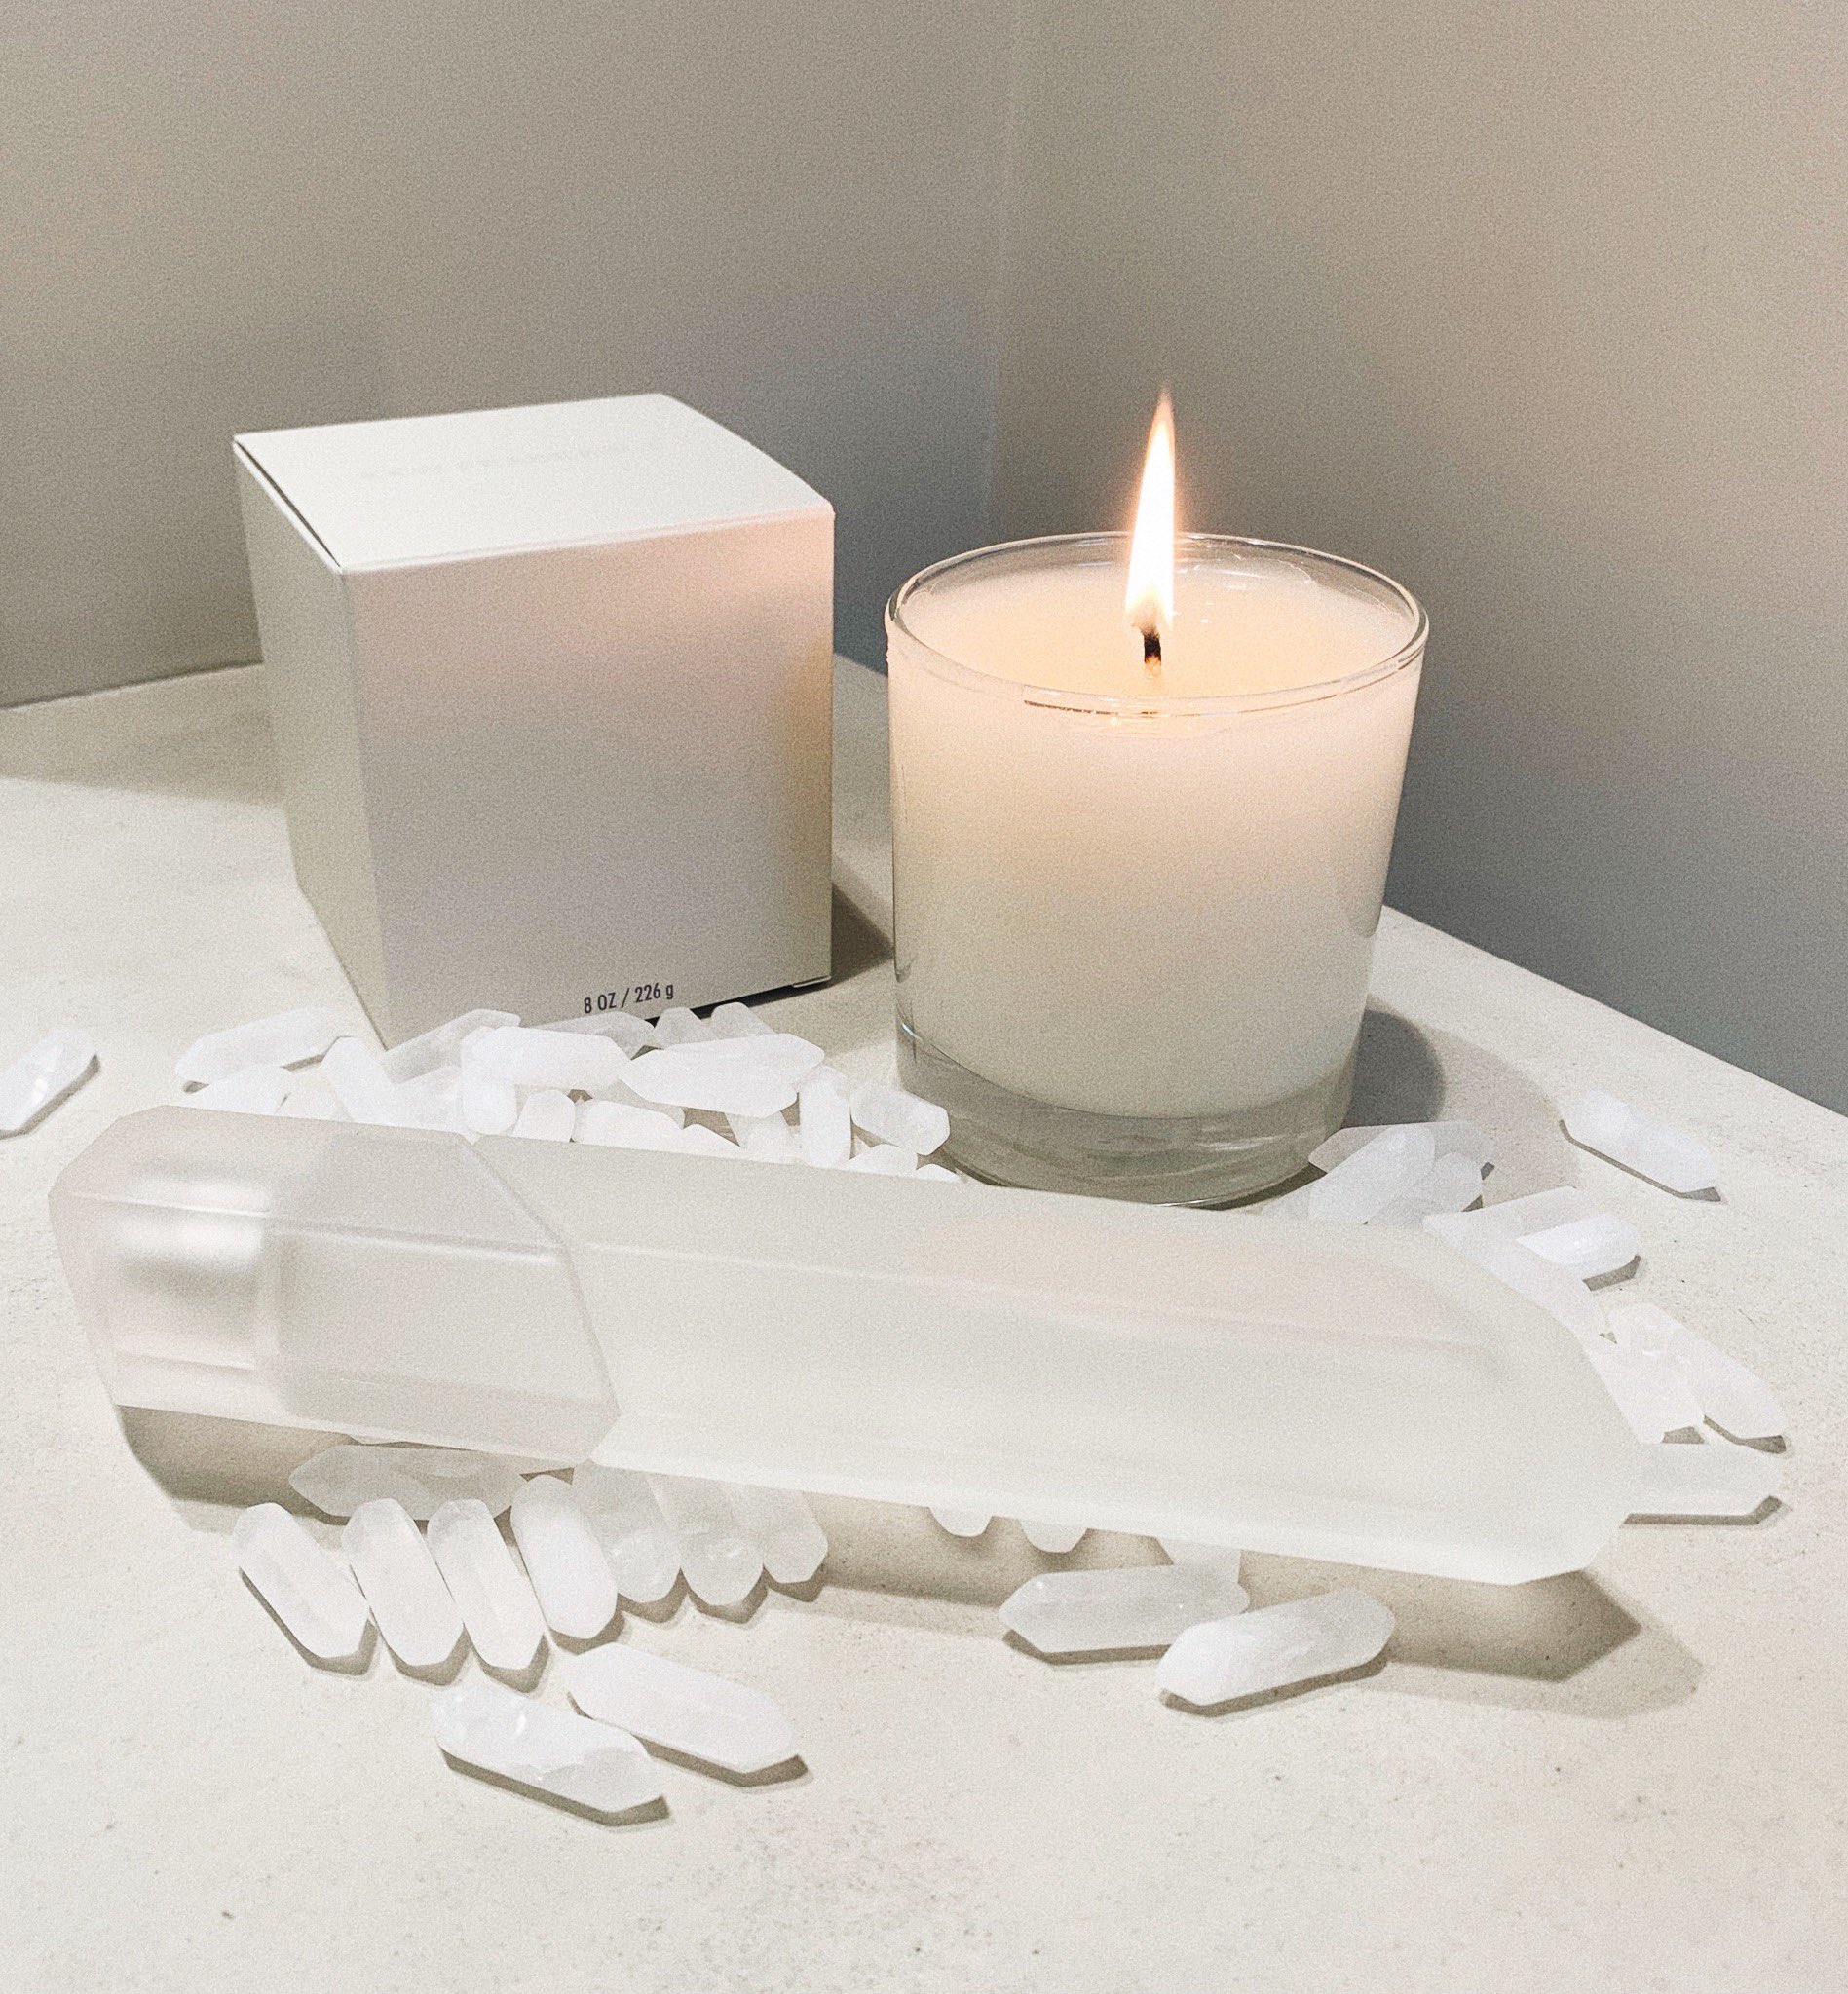 KKW FRAGRANCE on Twitter: "Shop the new #KKWFRAGRANCE candle individua...